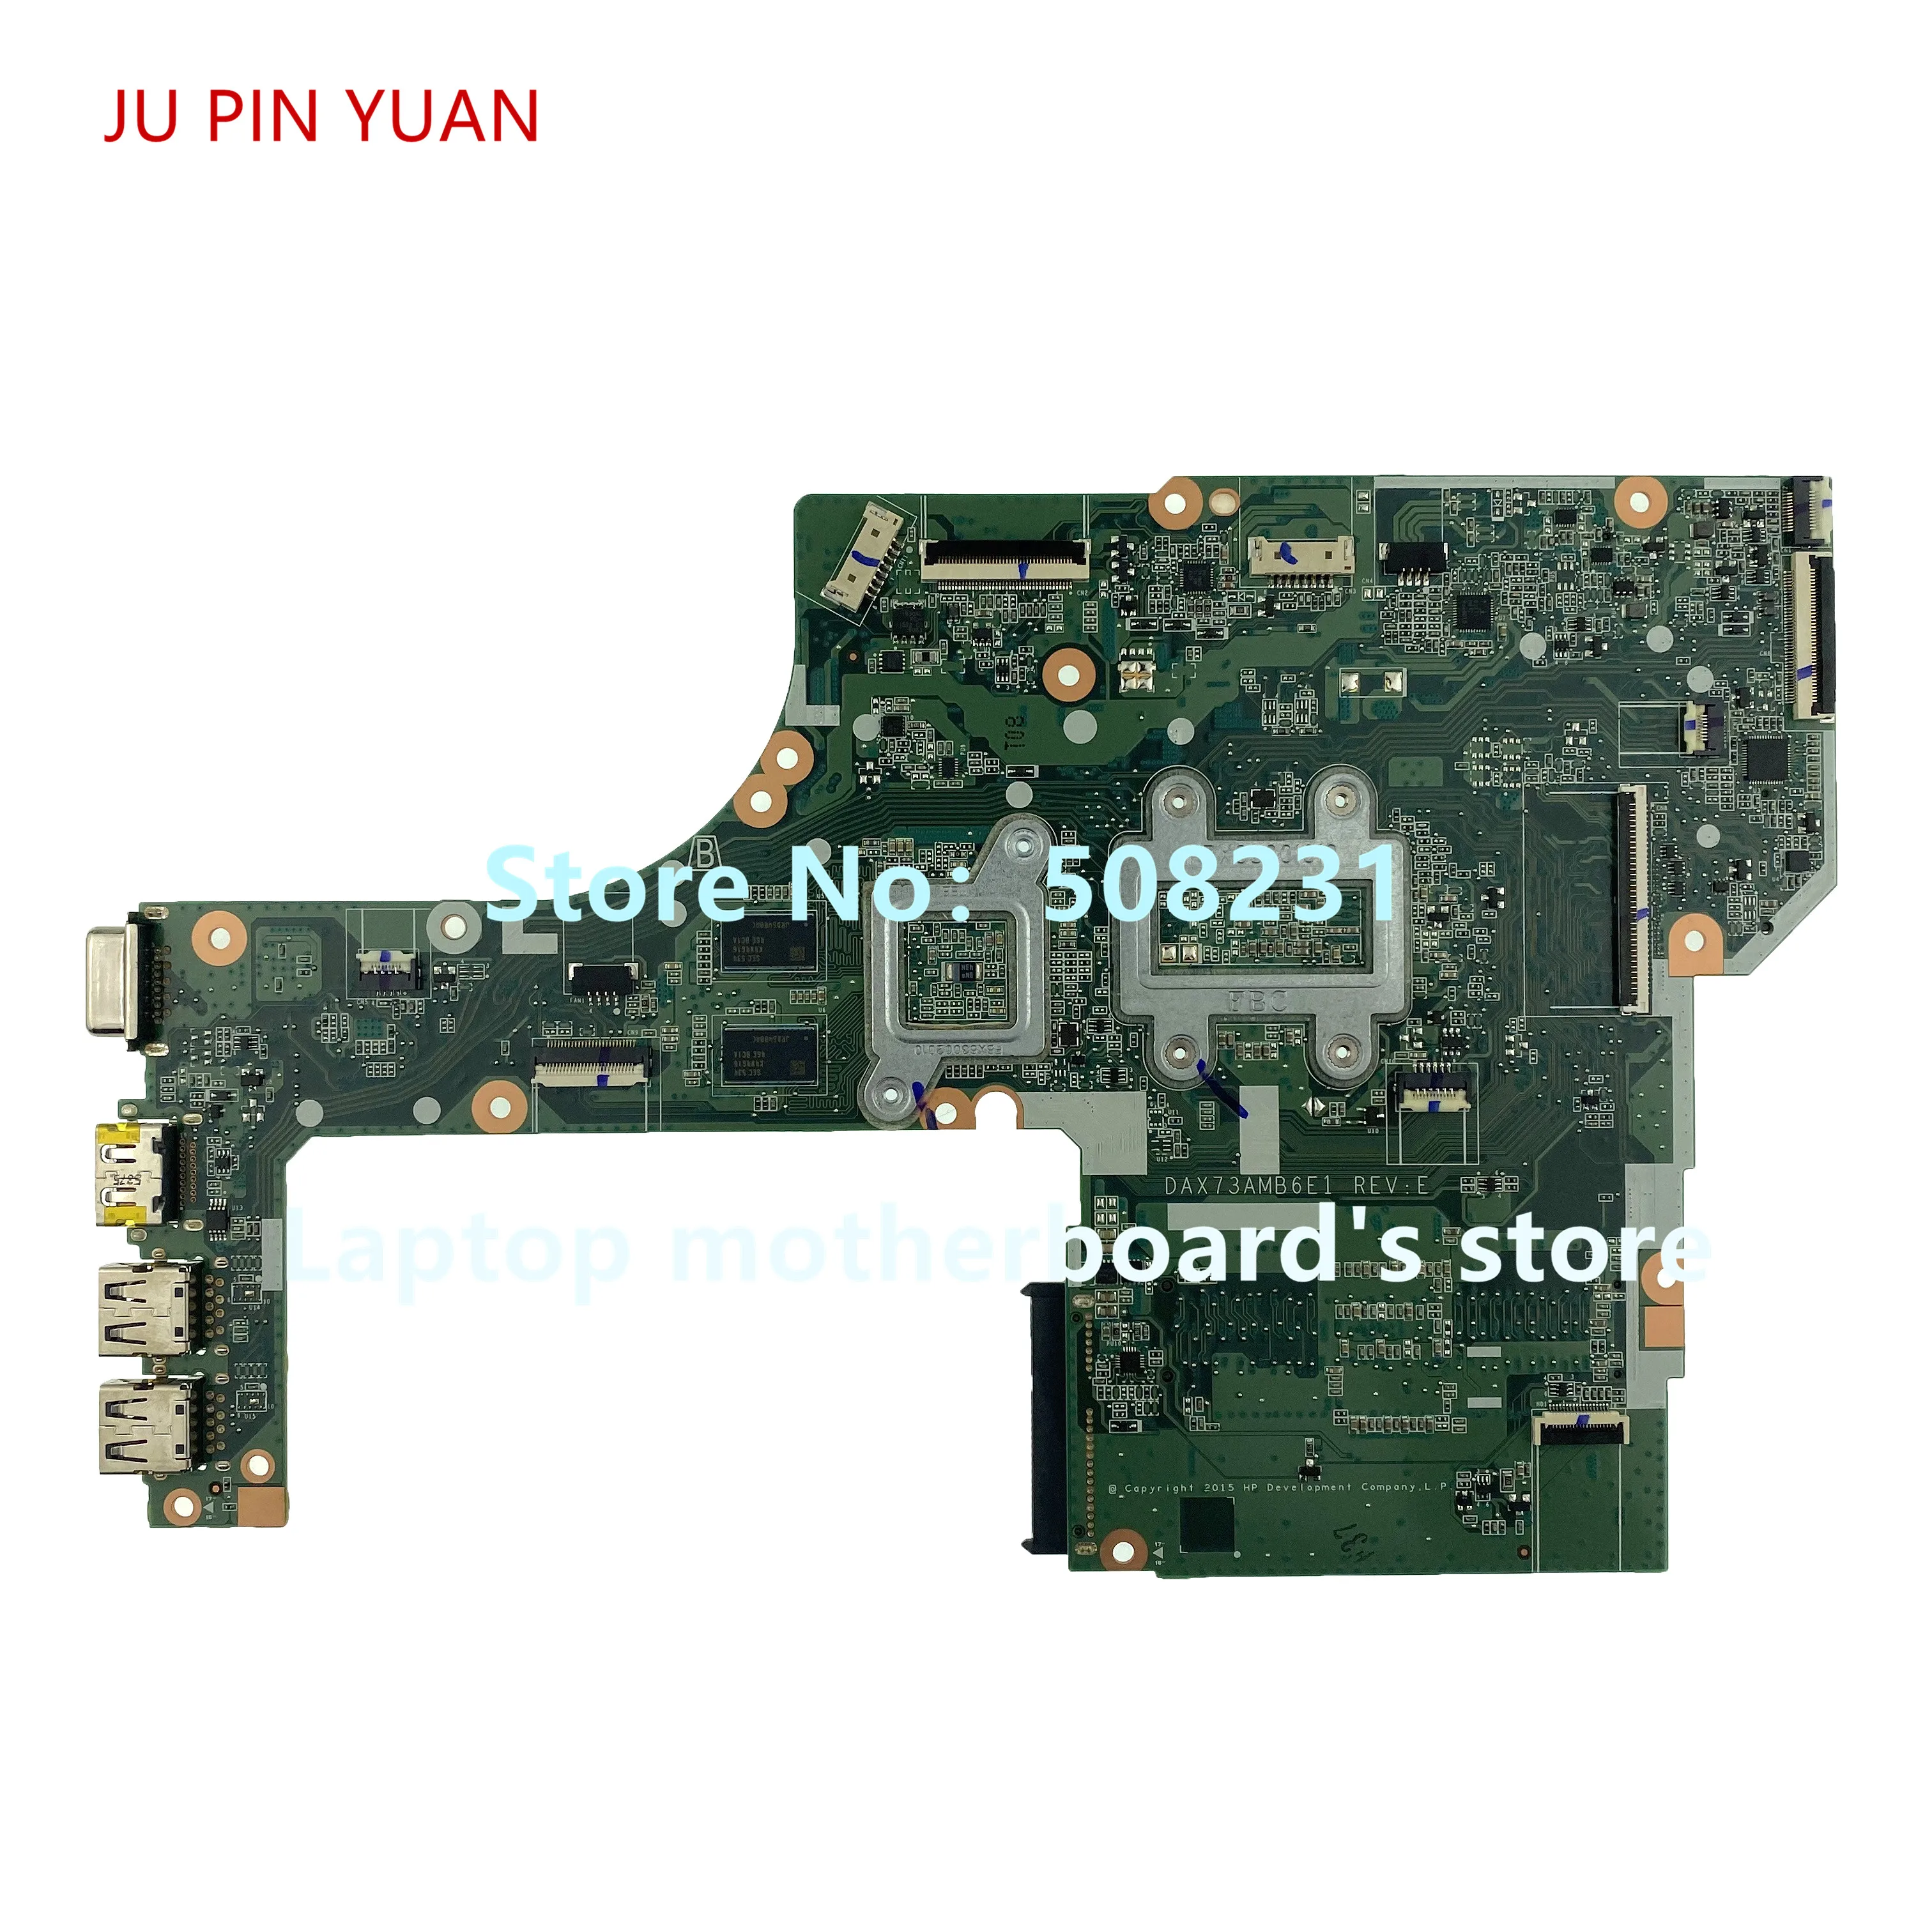 Low Price  JU PIN YUAN for HP 455 G3 445 G3 series laptop motherboard 828434-001 828434-501 828434-601 DAX73AM